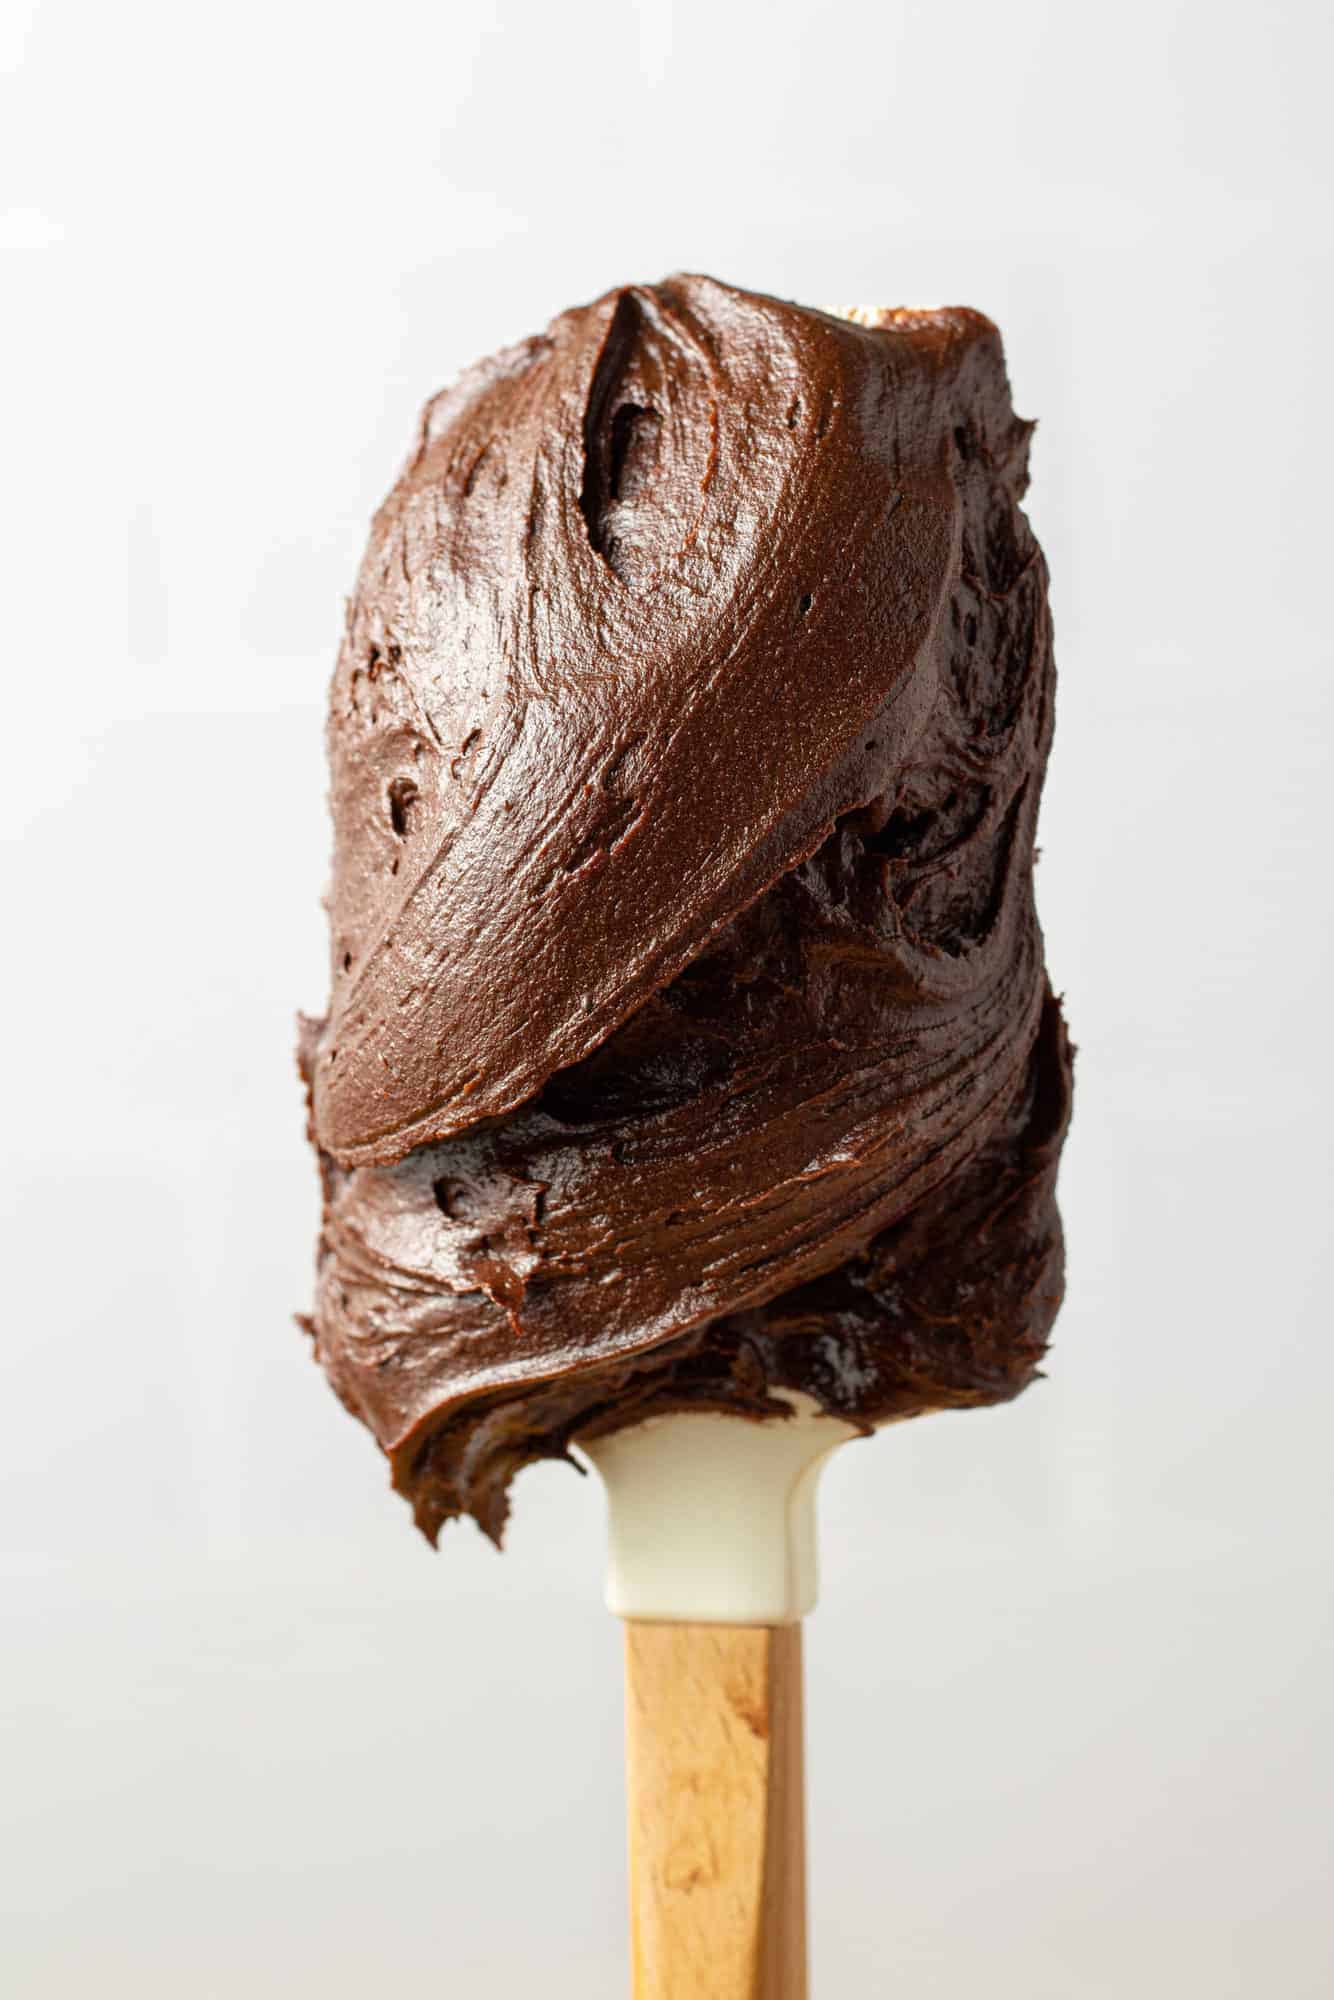 Frosting on a wooden handled white spatula. 